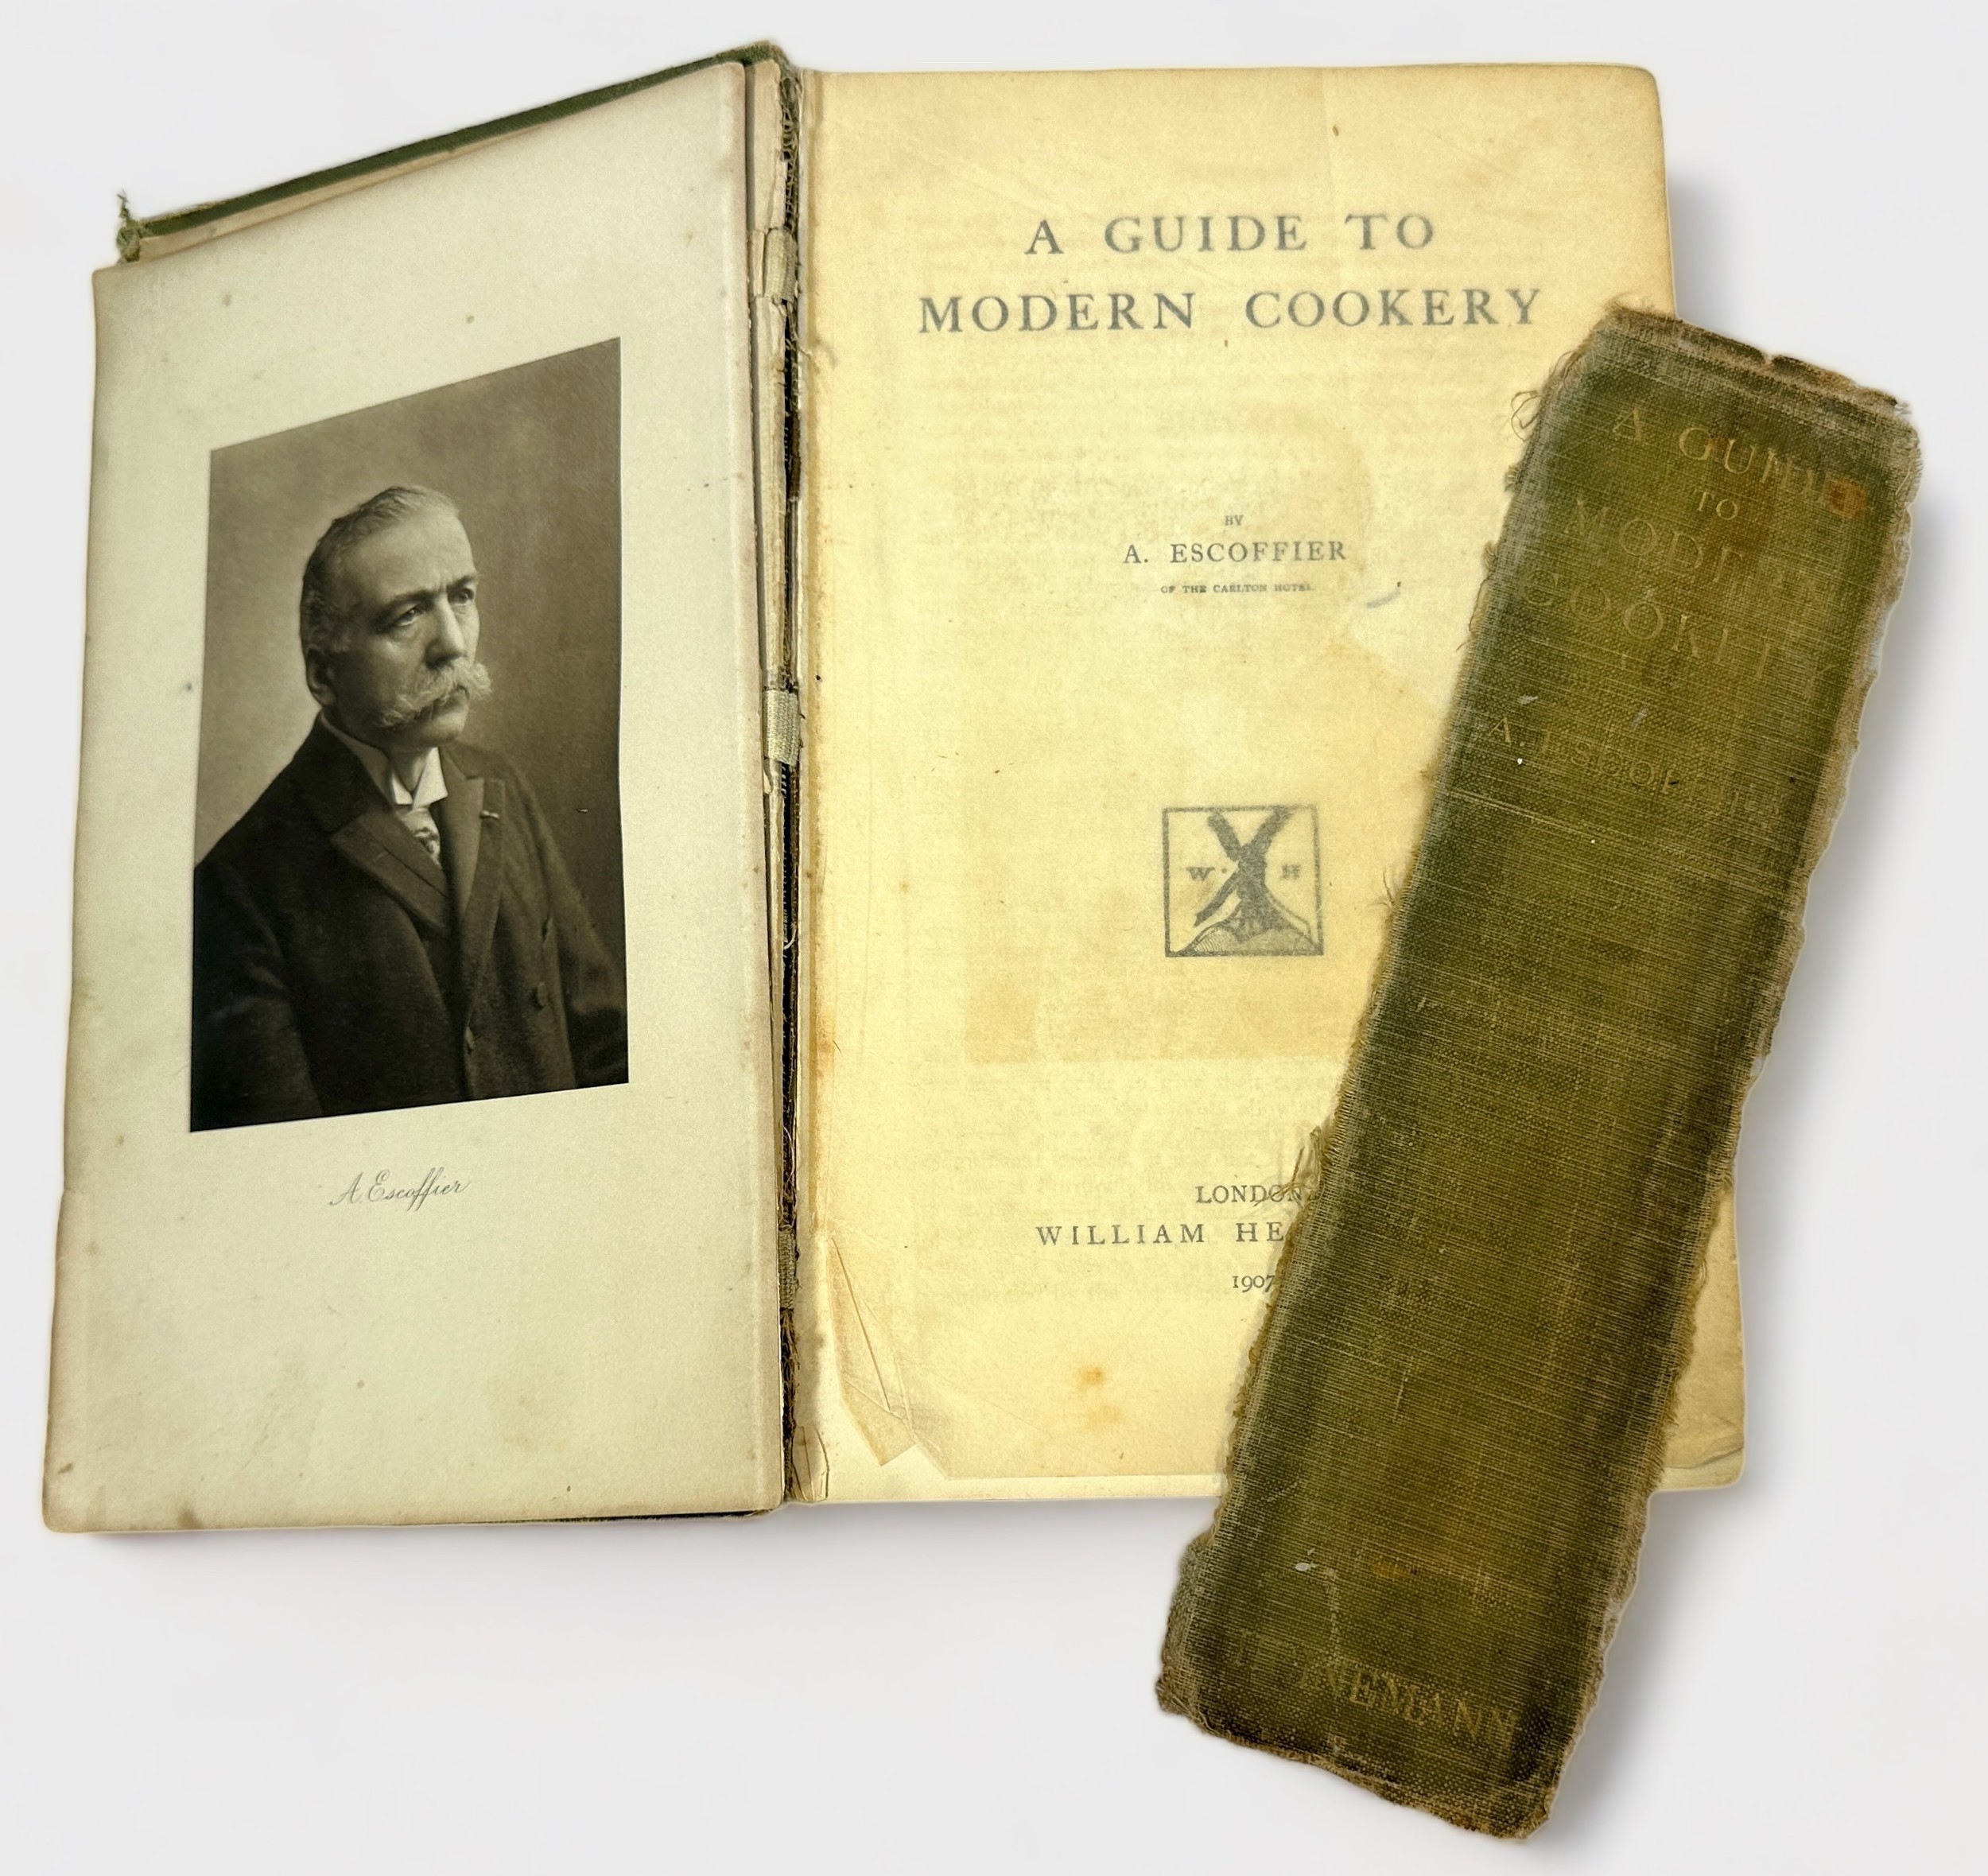 A. Escoffier, A Guide to Modern Cookery published by Heinemann 1907, first edition in original cloth - Image 2 of 4